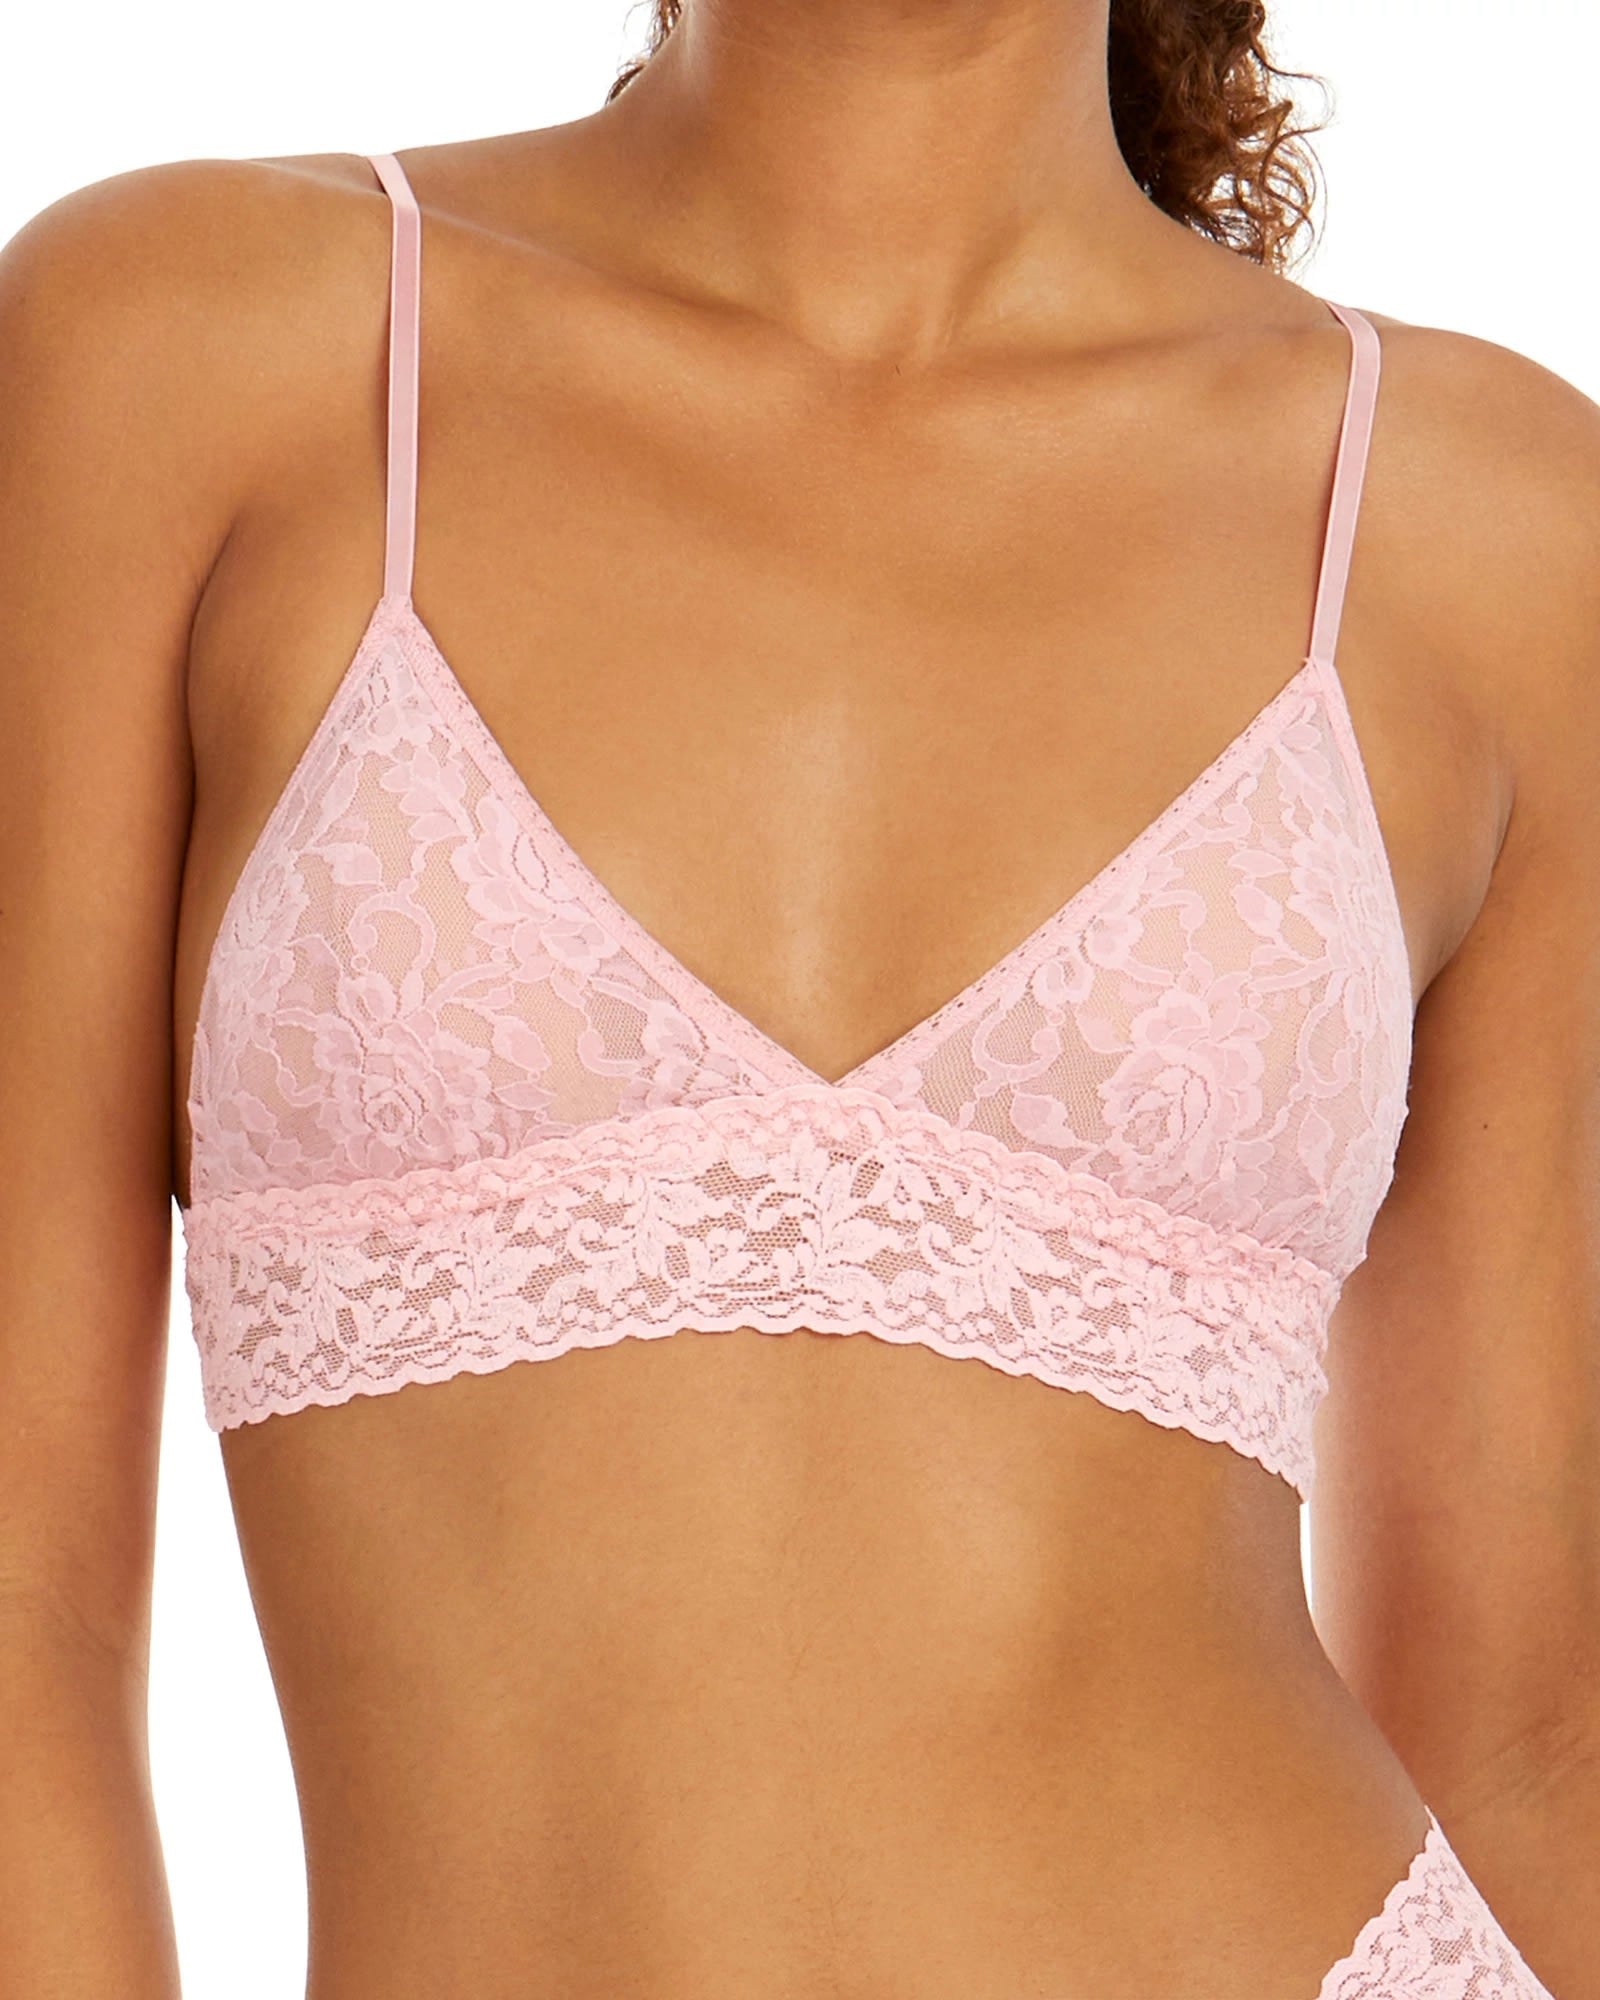 Future Foundations Bra with Lace